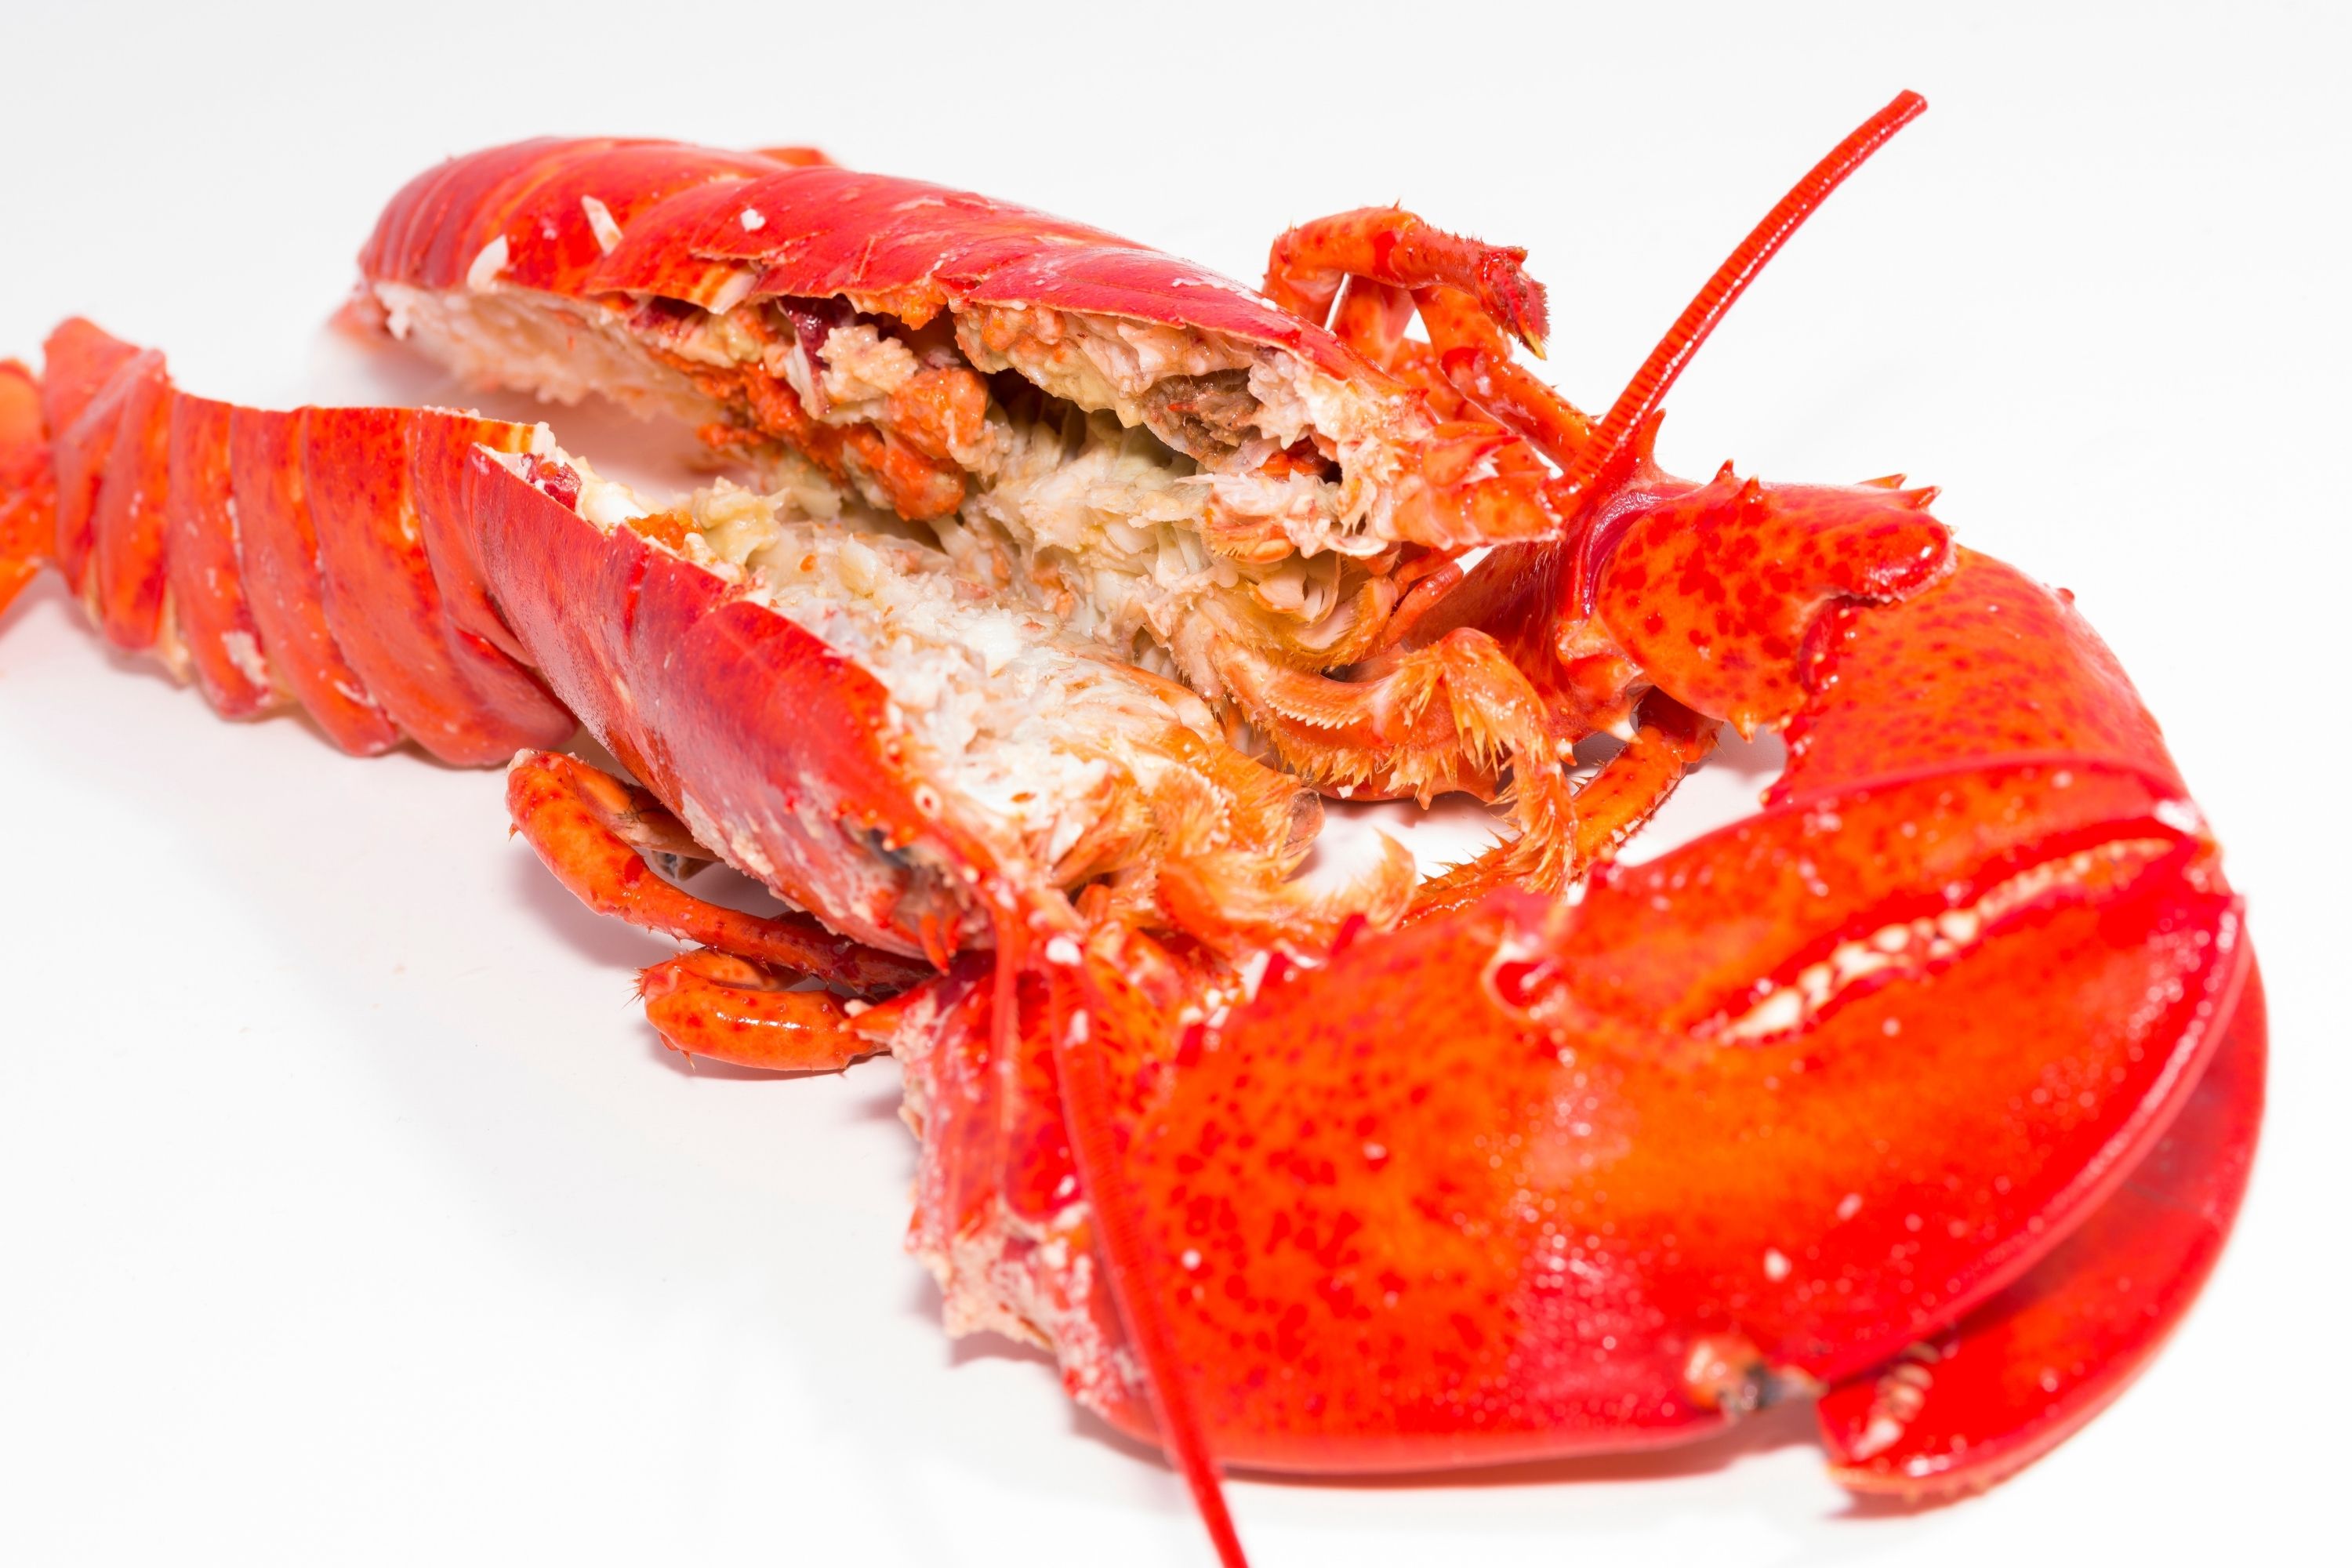 How to Tell If Raw Lobster Is Bad